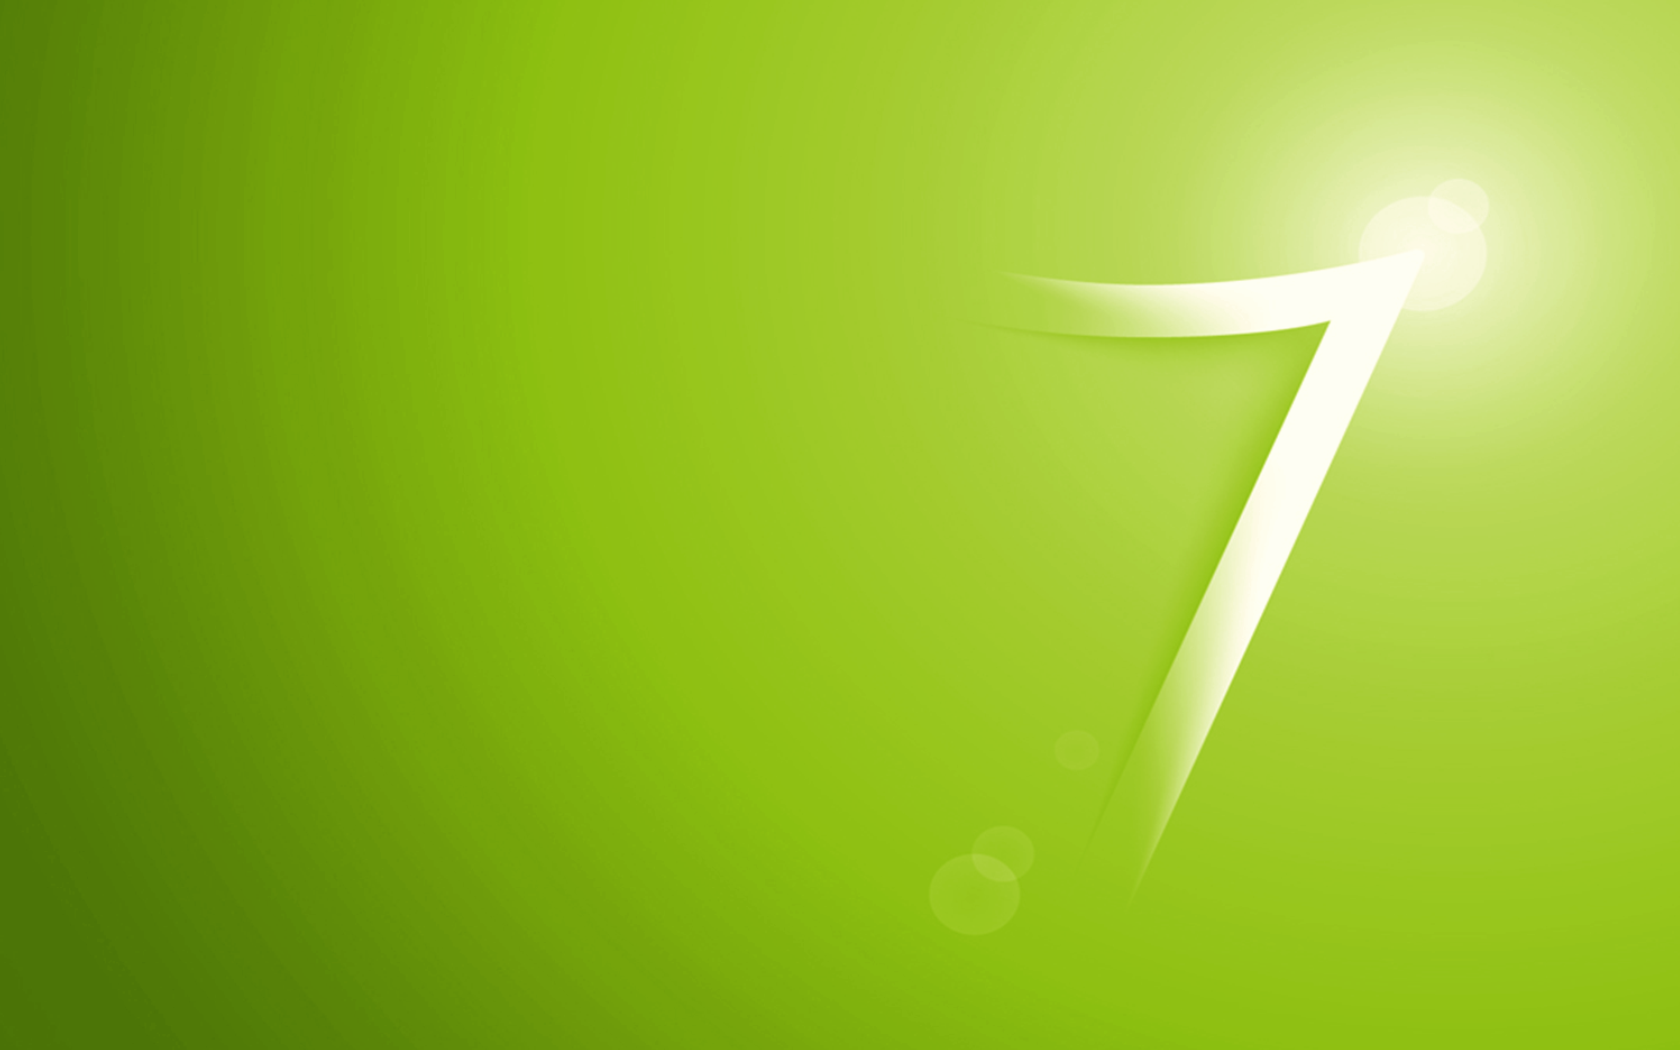 Windows 7 Green « Awesome Wallpaper